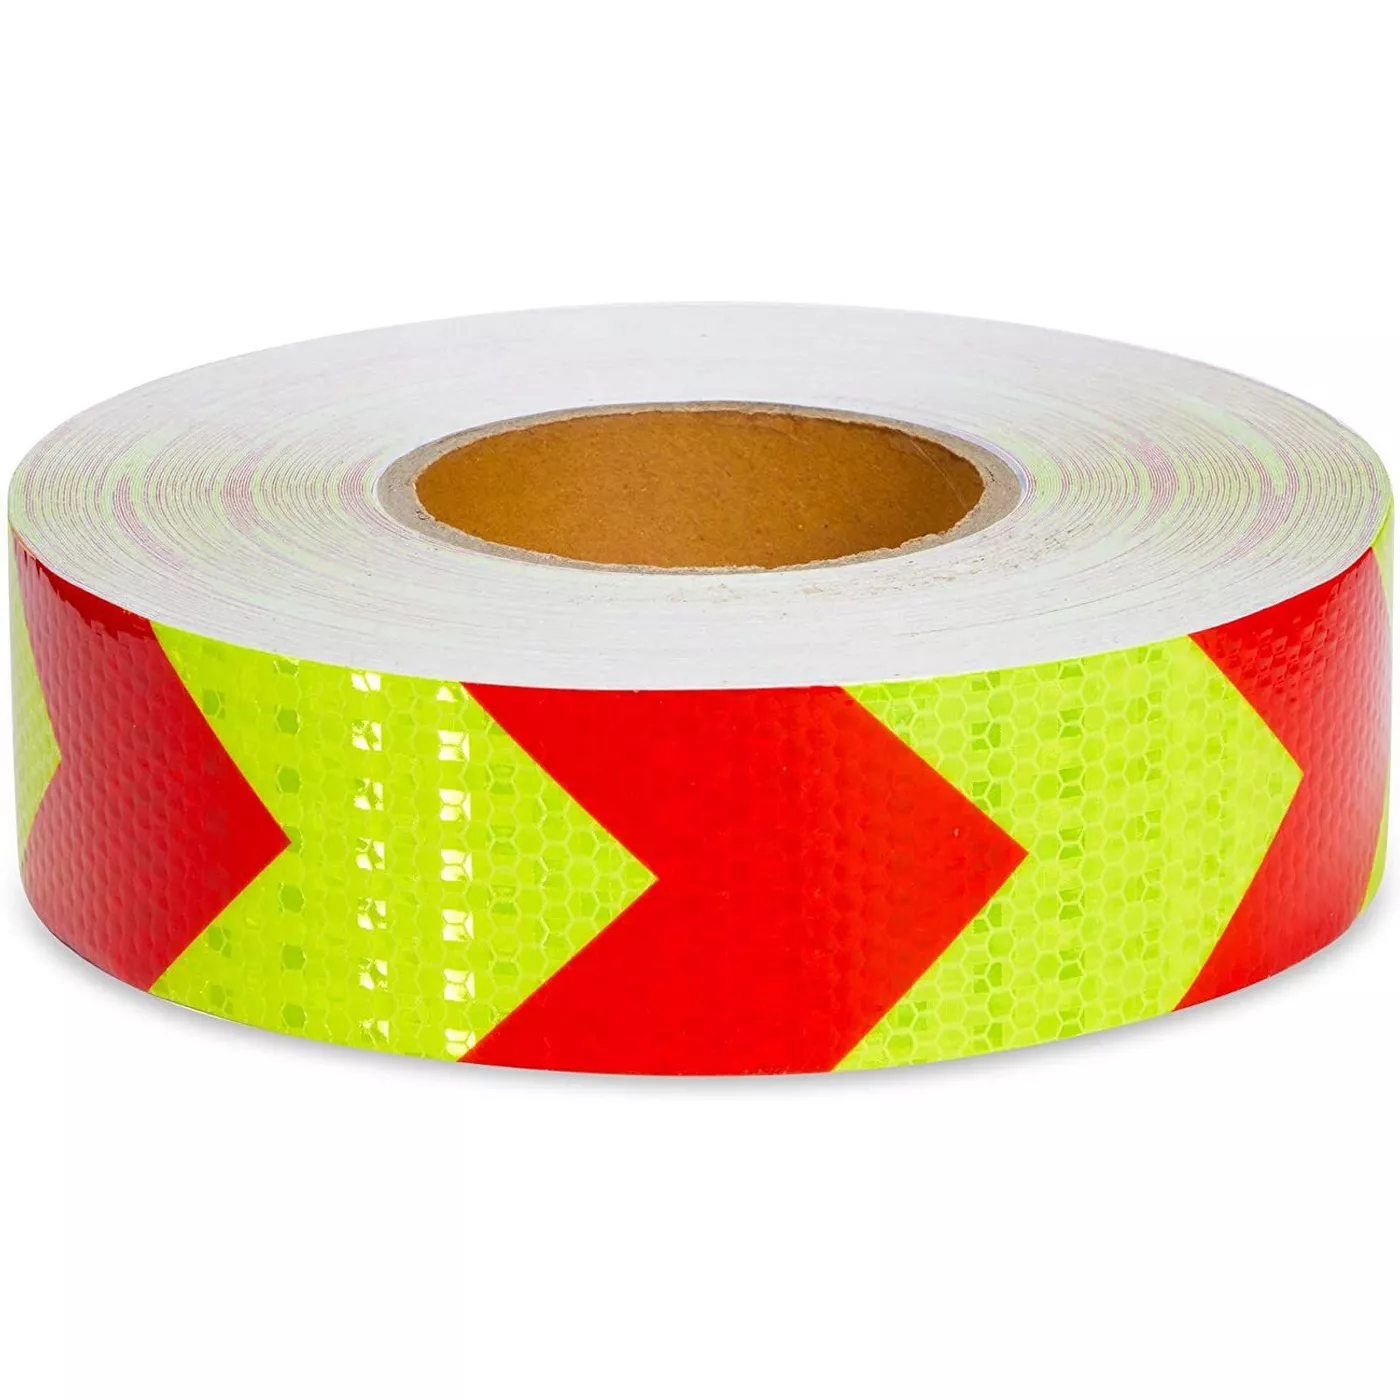 High Intensity Honey Comb Type Arrow PVC Adhesive Sticker Reflective Tape for Safety